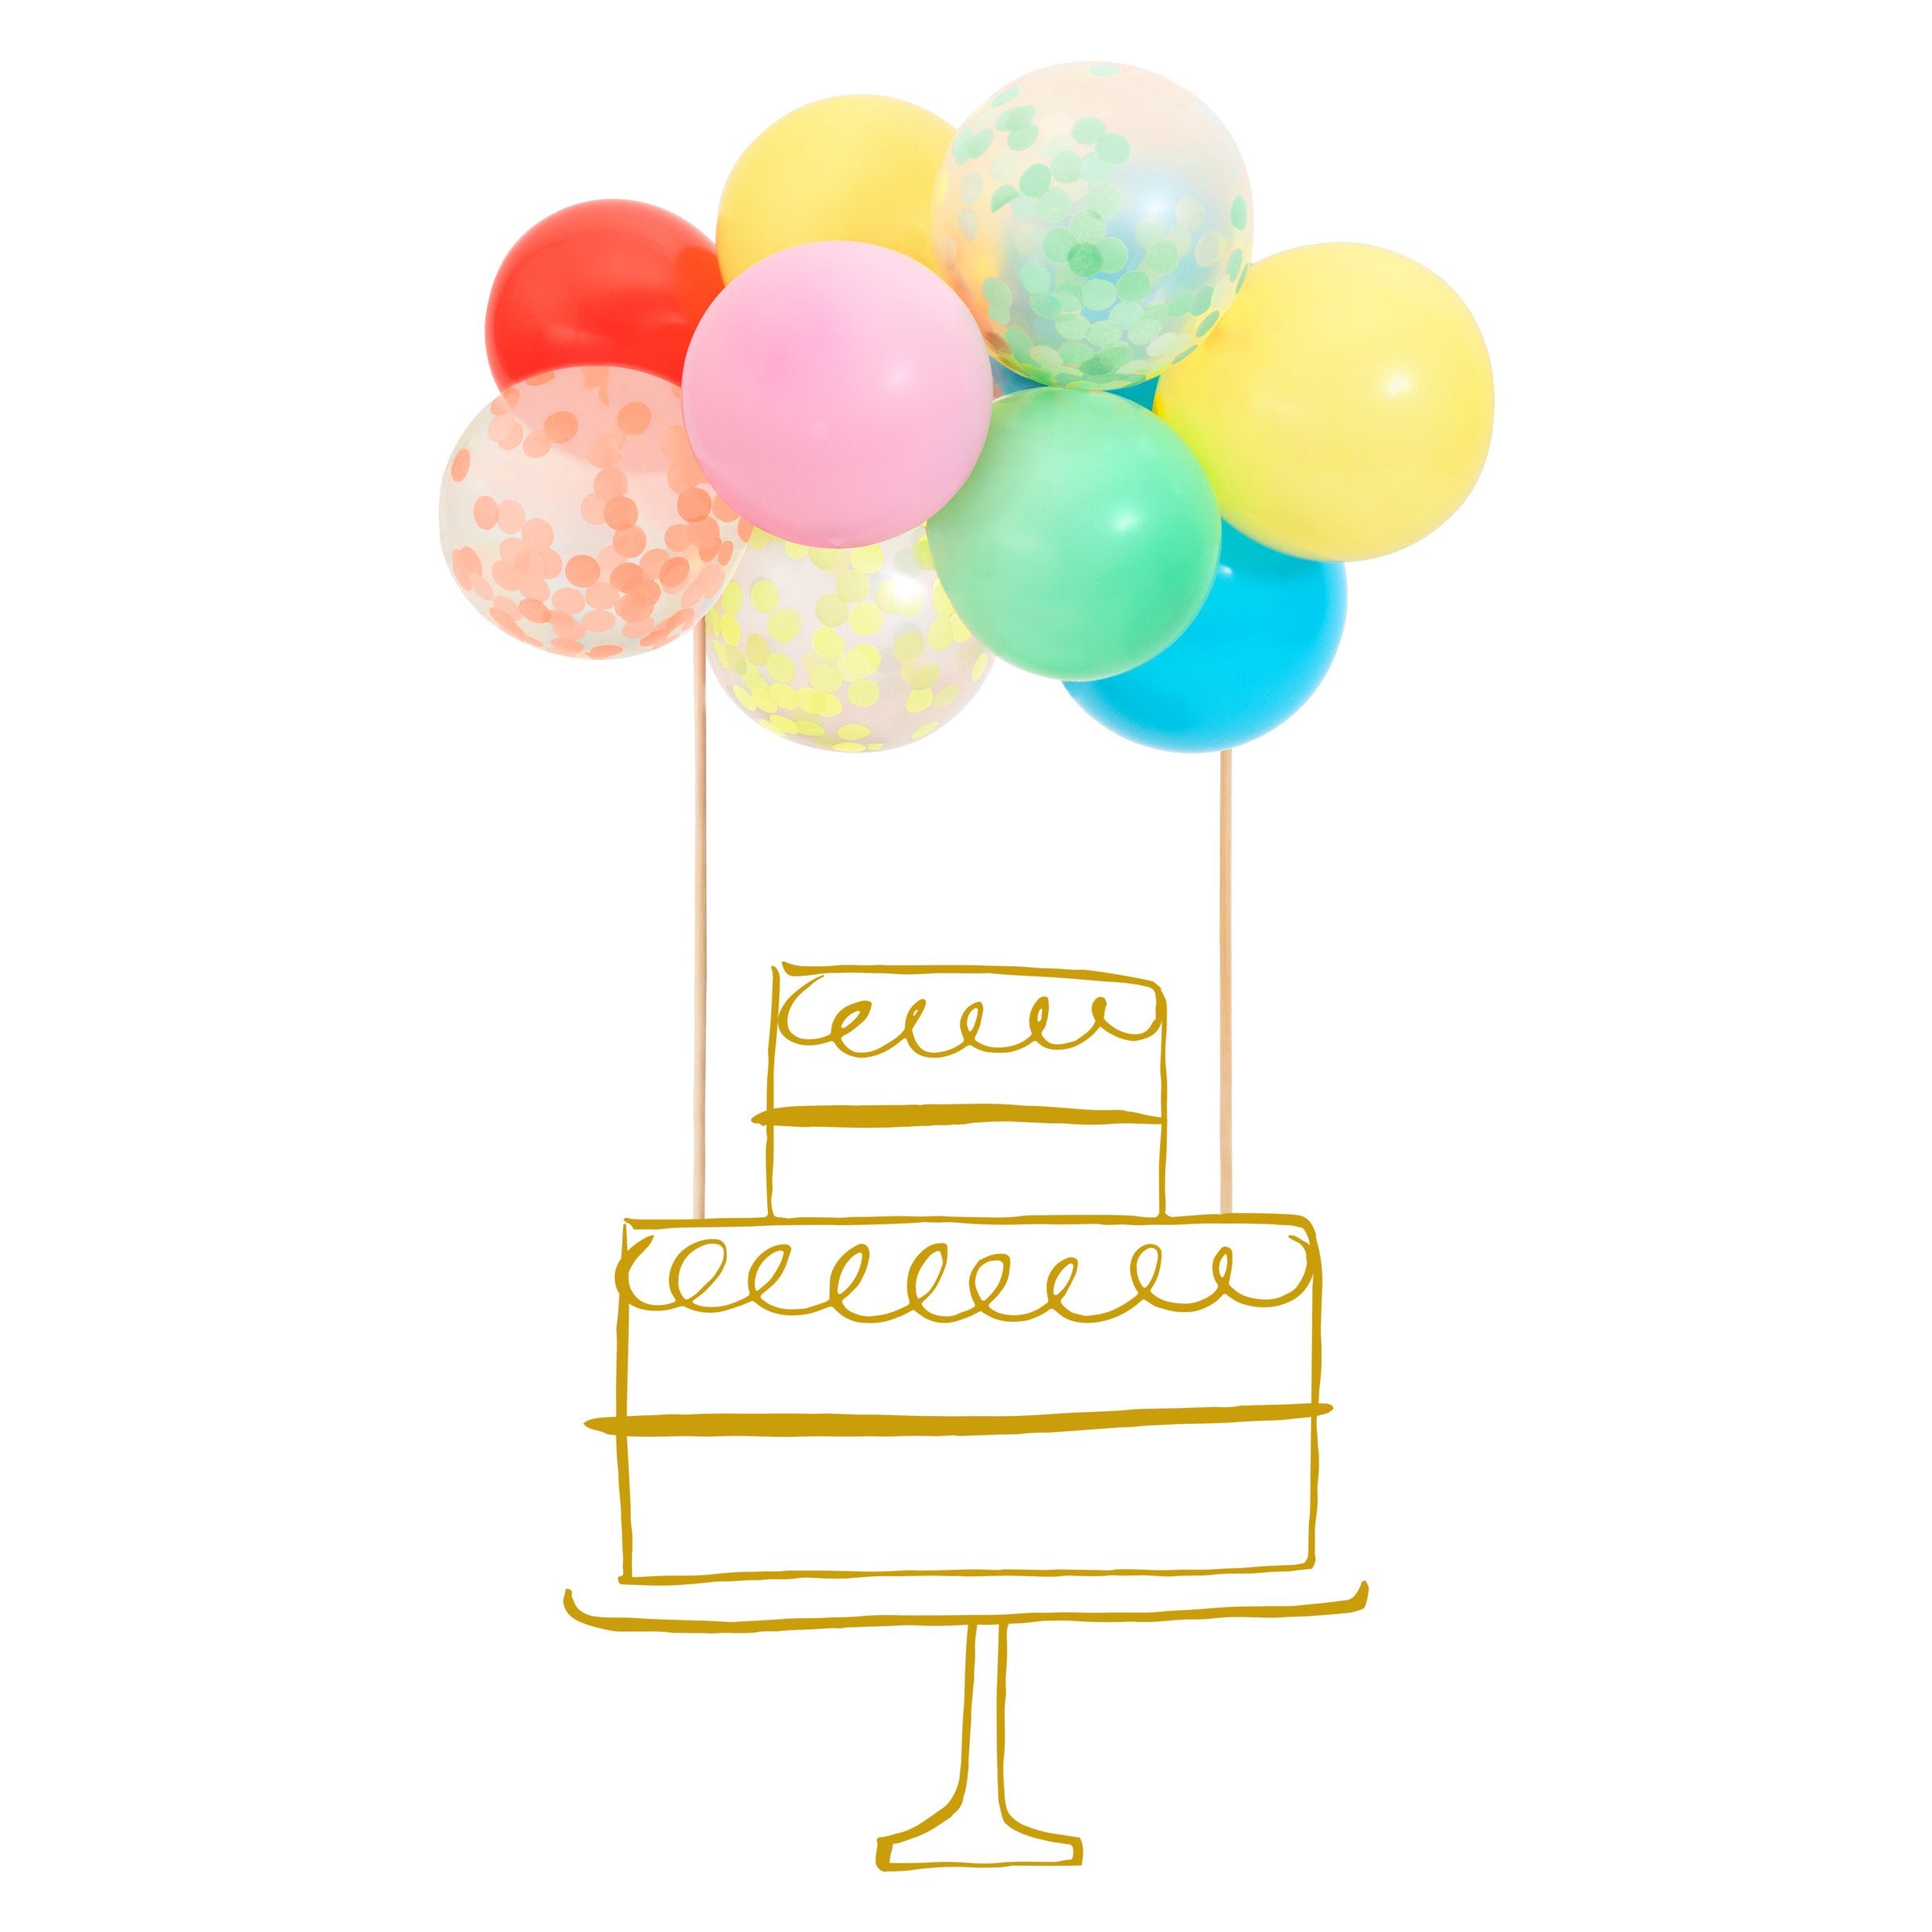 This cake topper kit includes bright balloons, confetti balloons, 2 wooden skewers, a balloon strip and an instruction sheet.